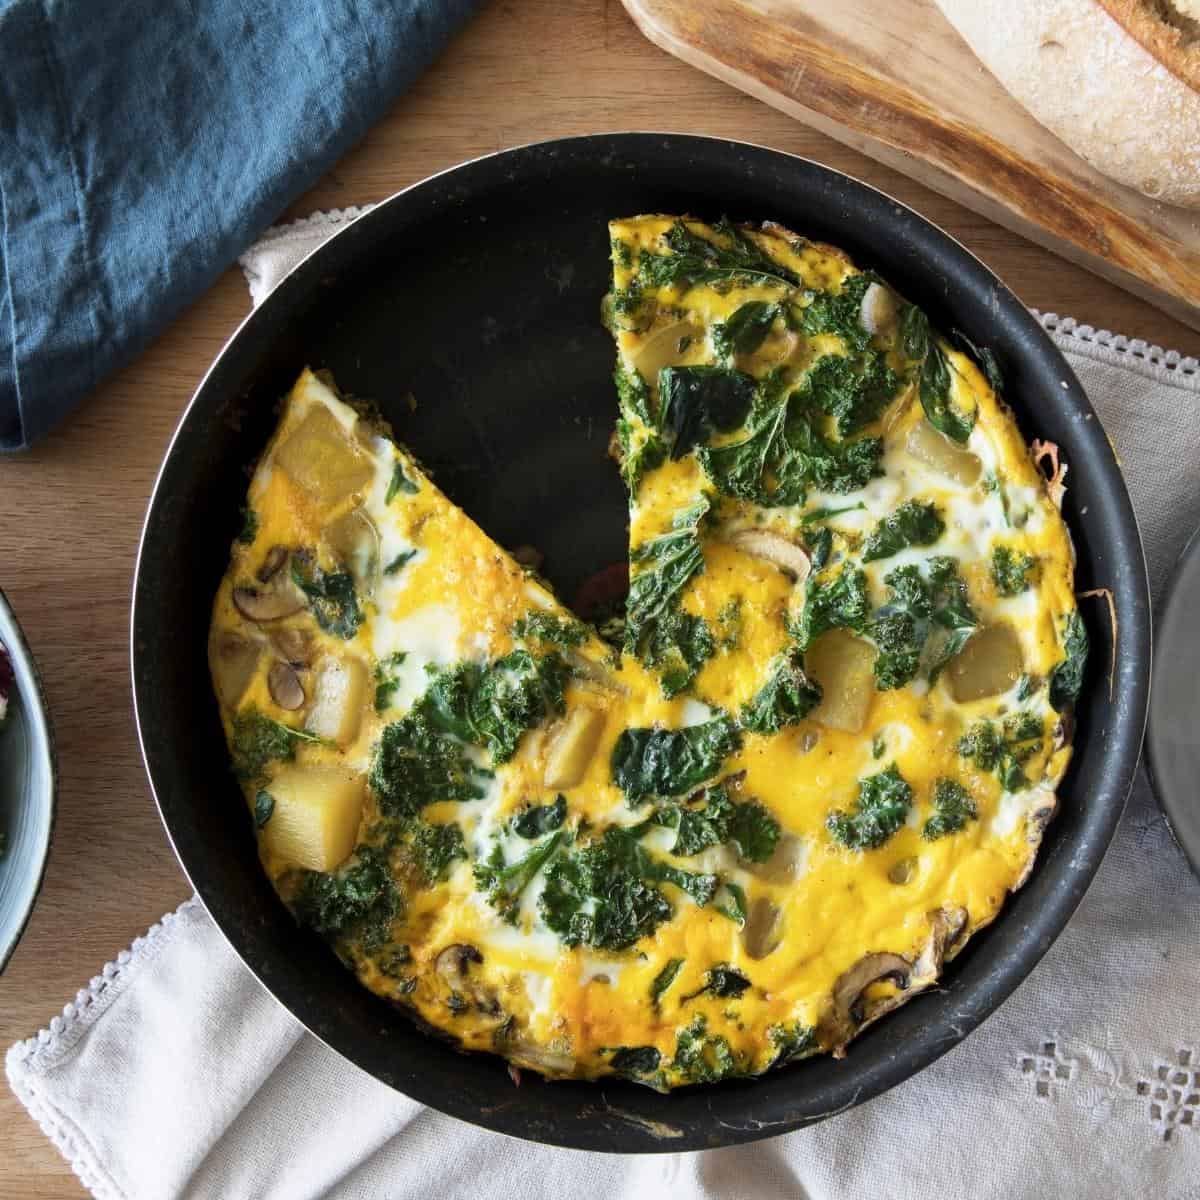 A frittata sitting on top of a wooden table